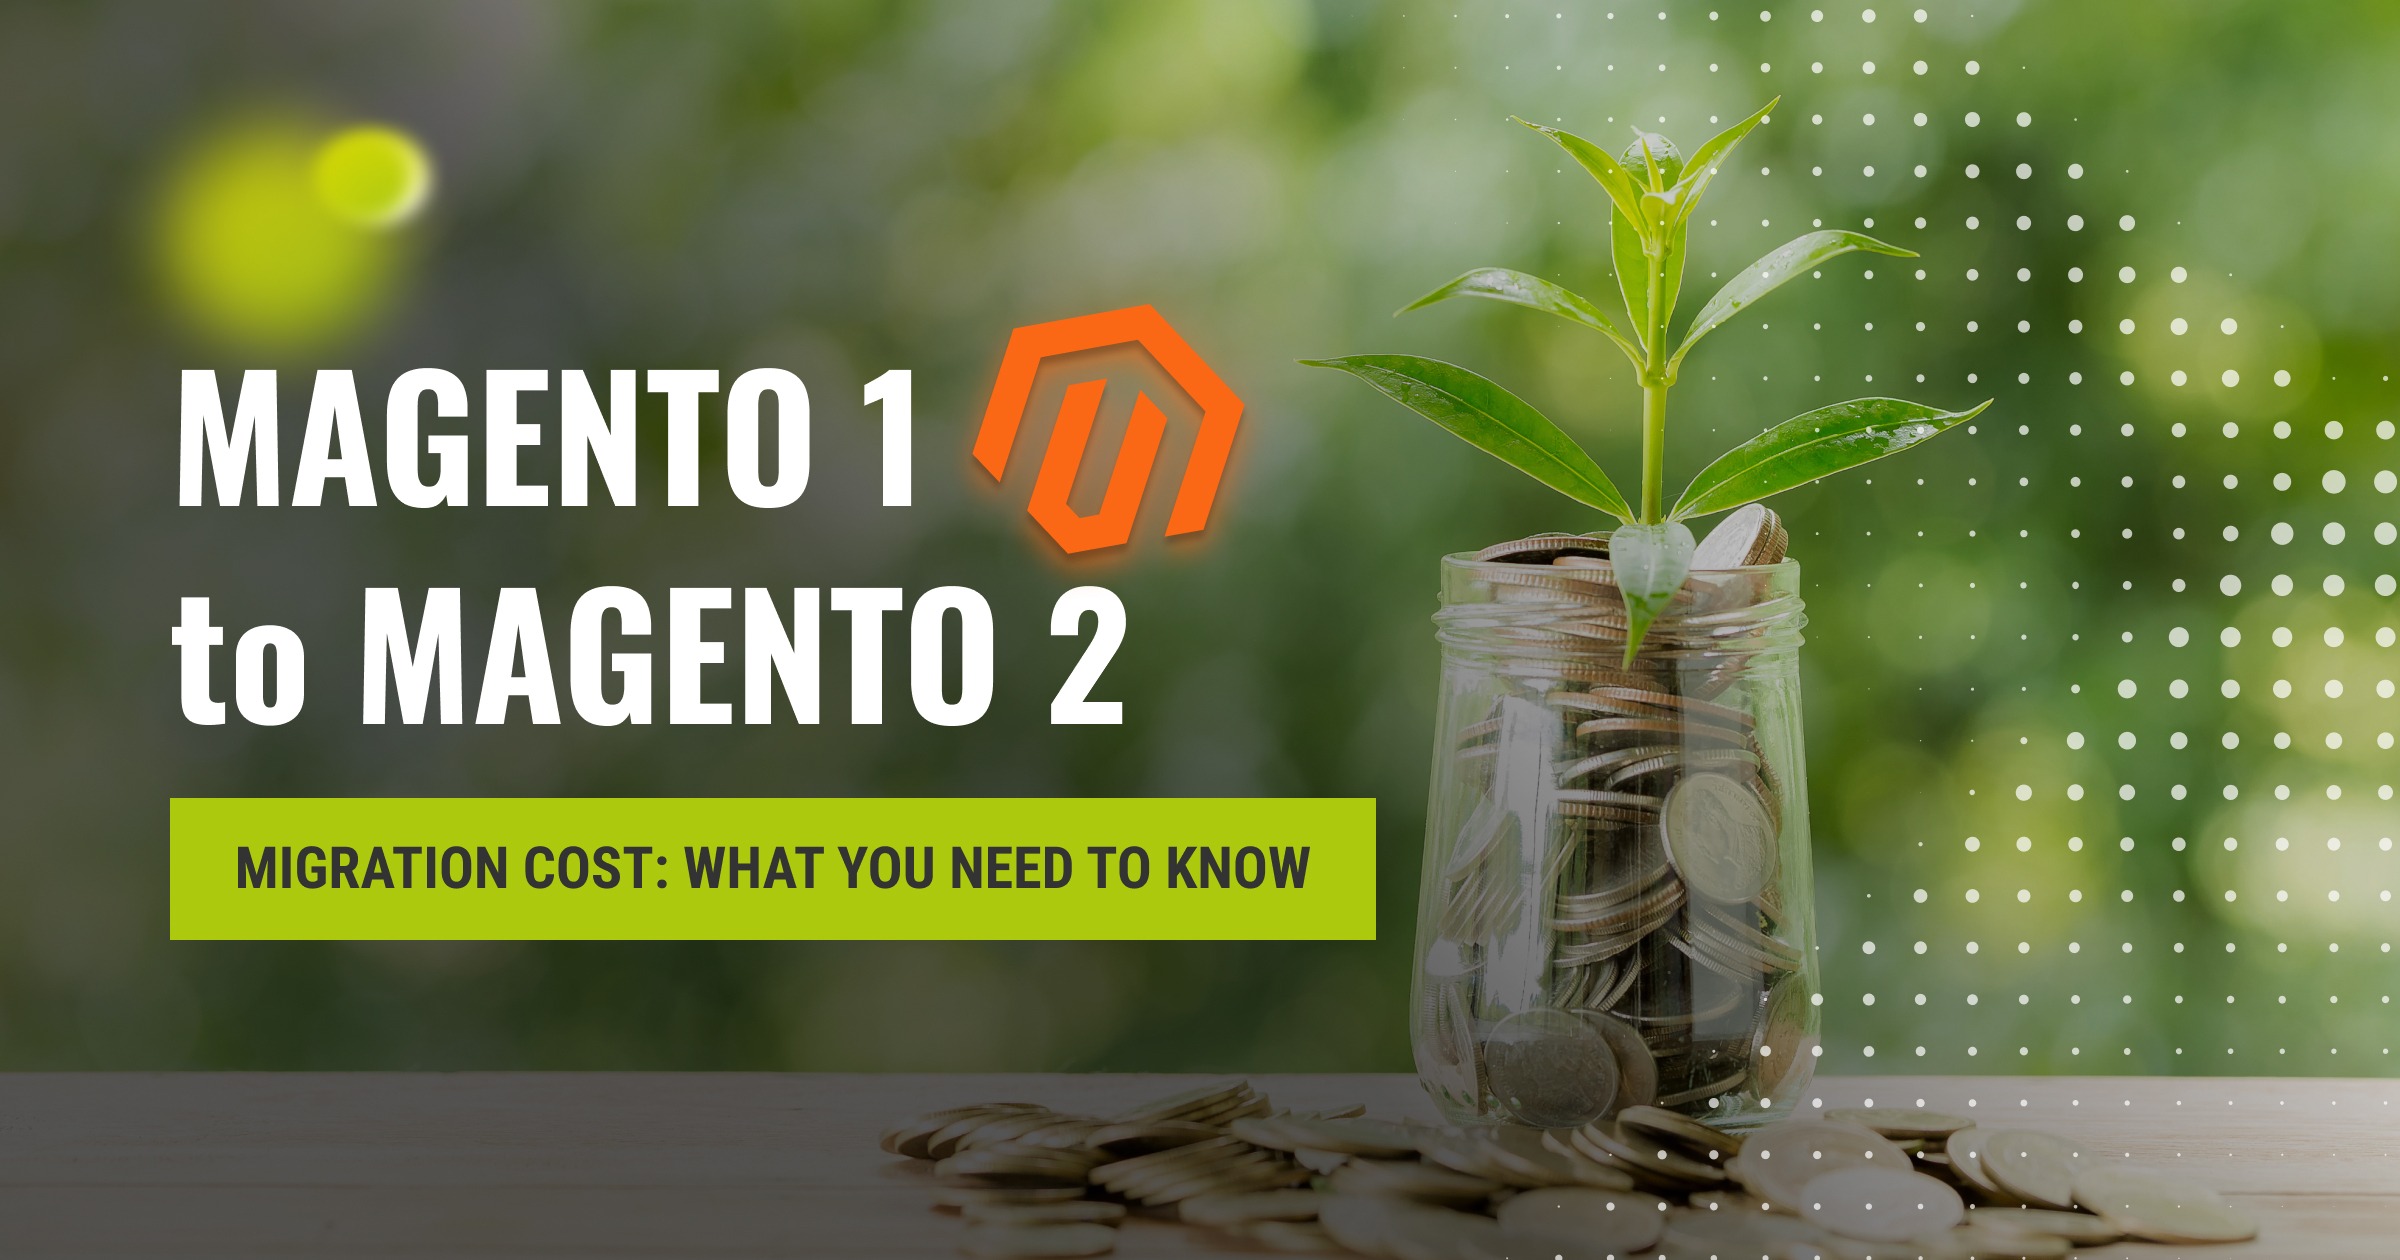 Magento 1 to Magento 2 Migration Cost: What You Need to Know